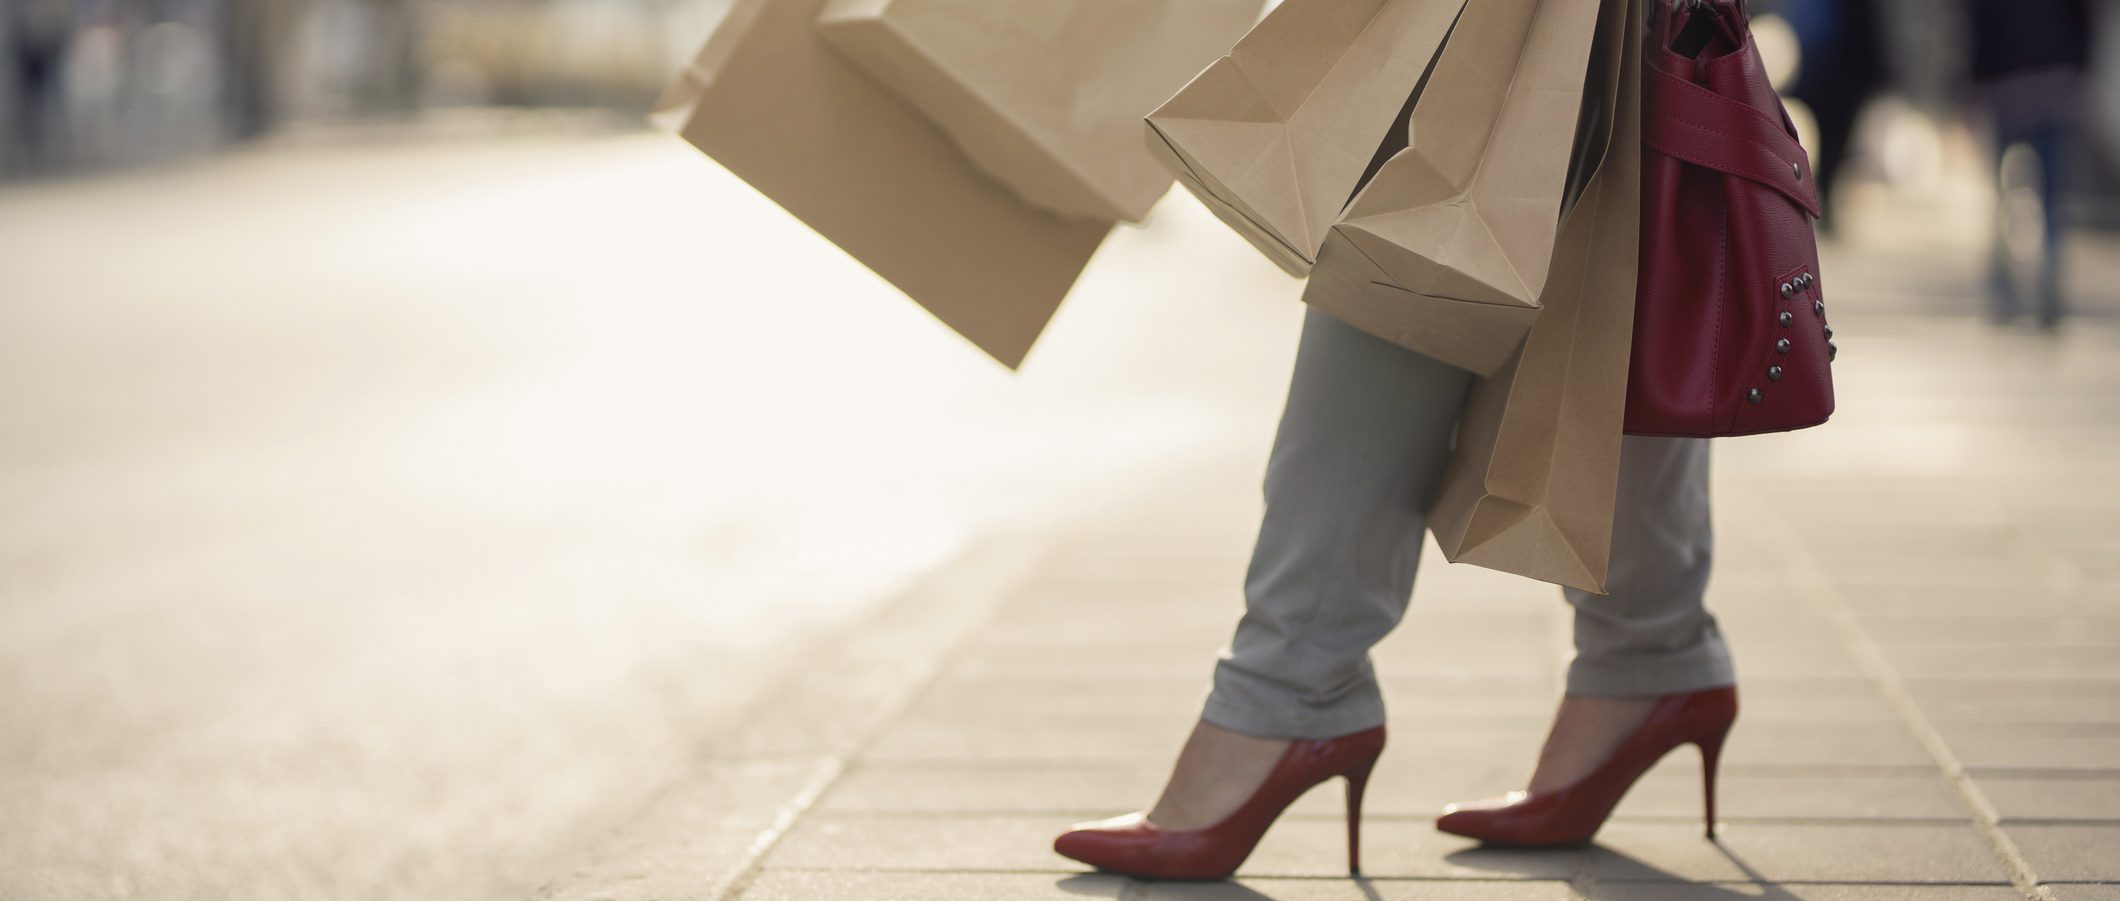 A woman wearing high heels, holding several shopping bags.